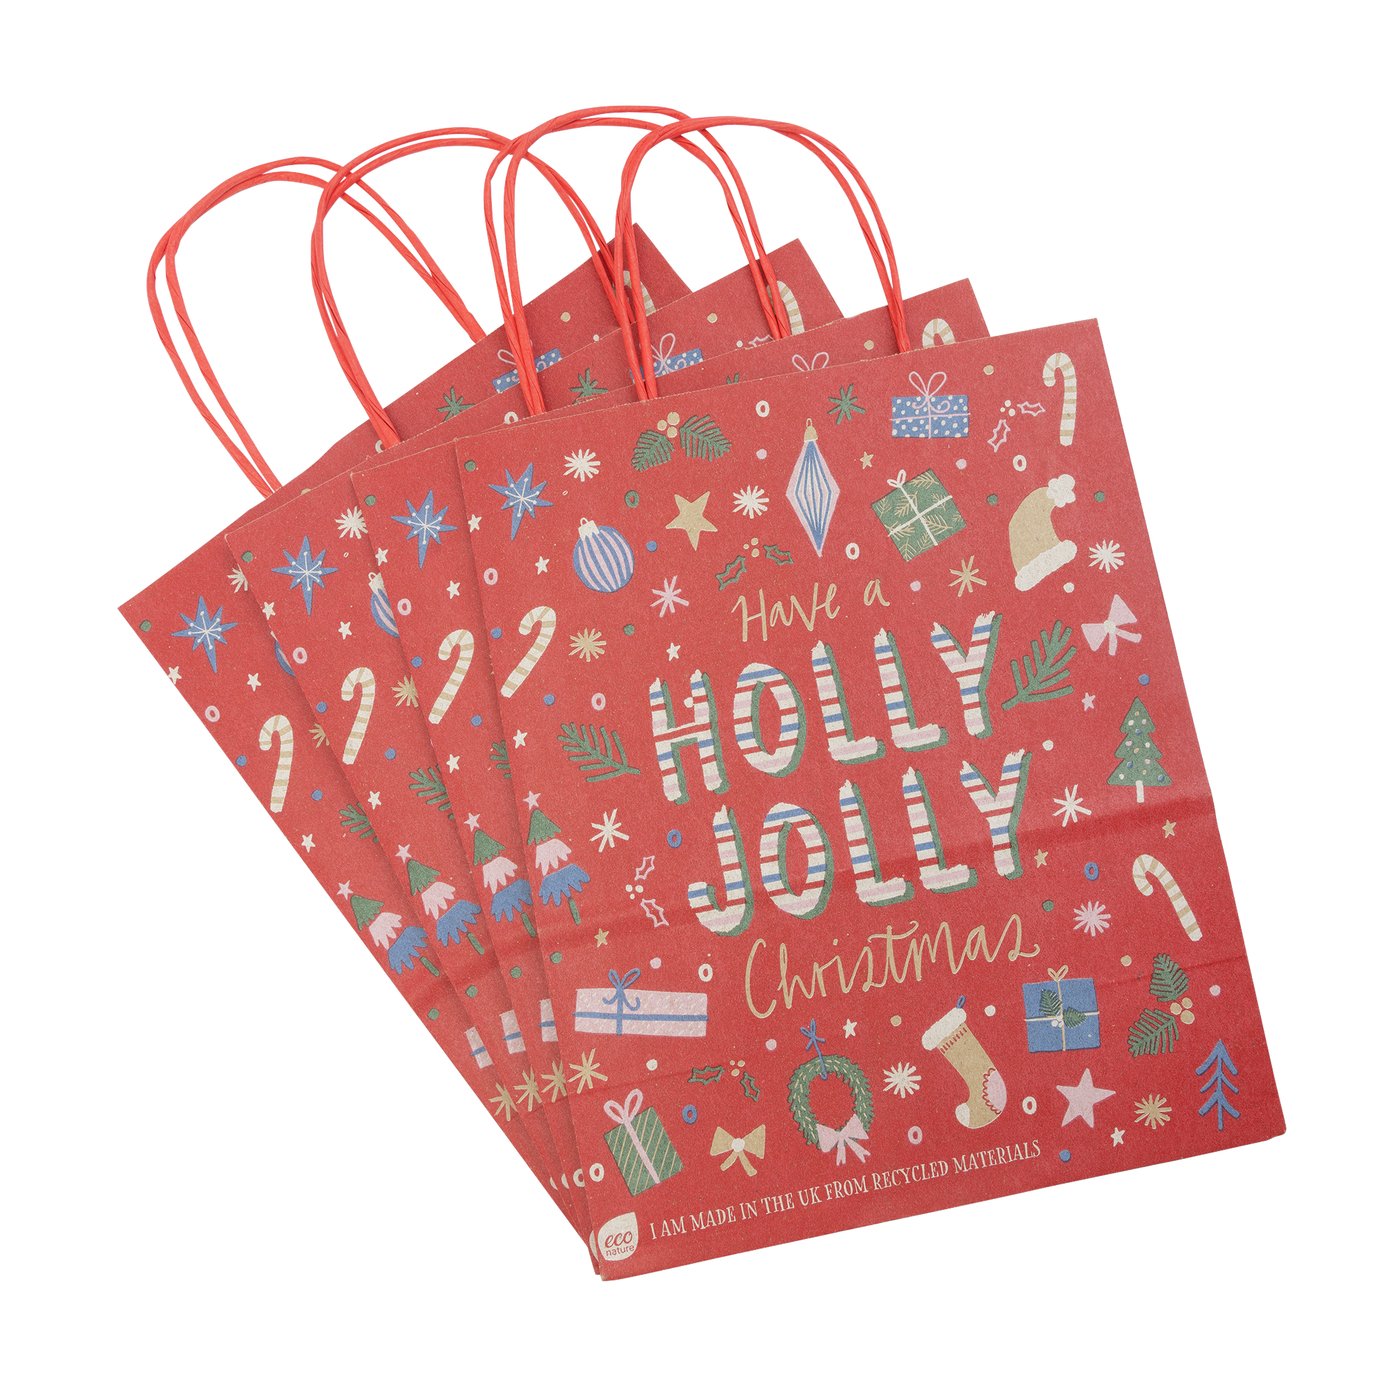 Eco Nature Medium Holly Jolly Christmas Gift Bags - 4 Pack